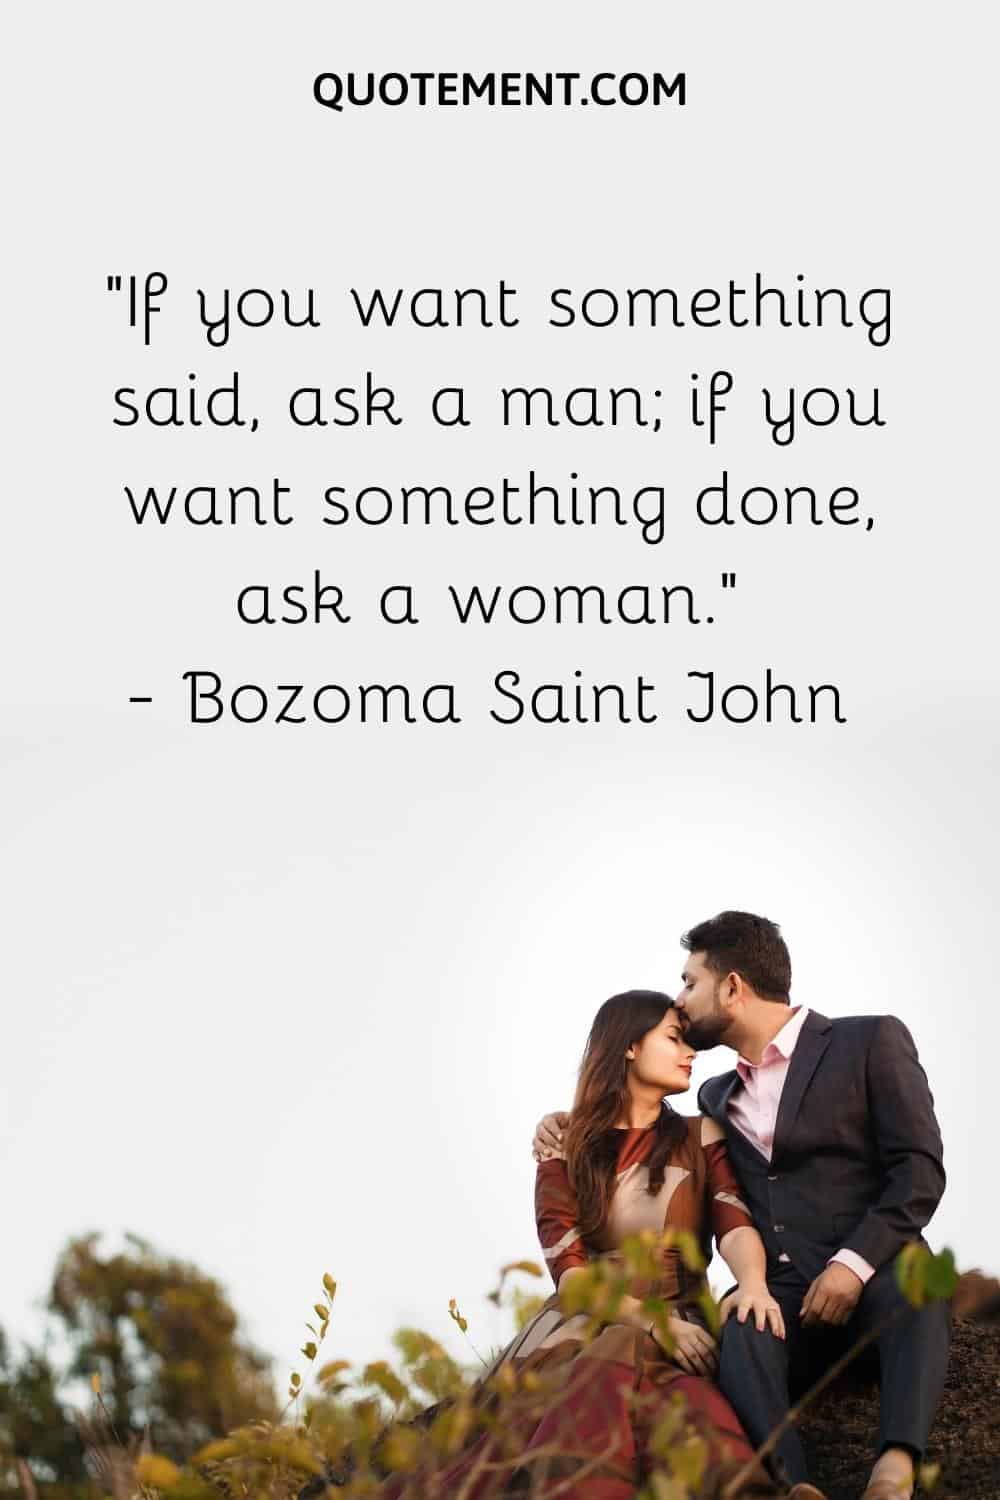 If you want something said, ask a man; if you want something done, ask a woman